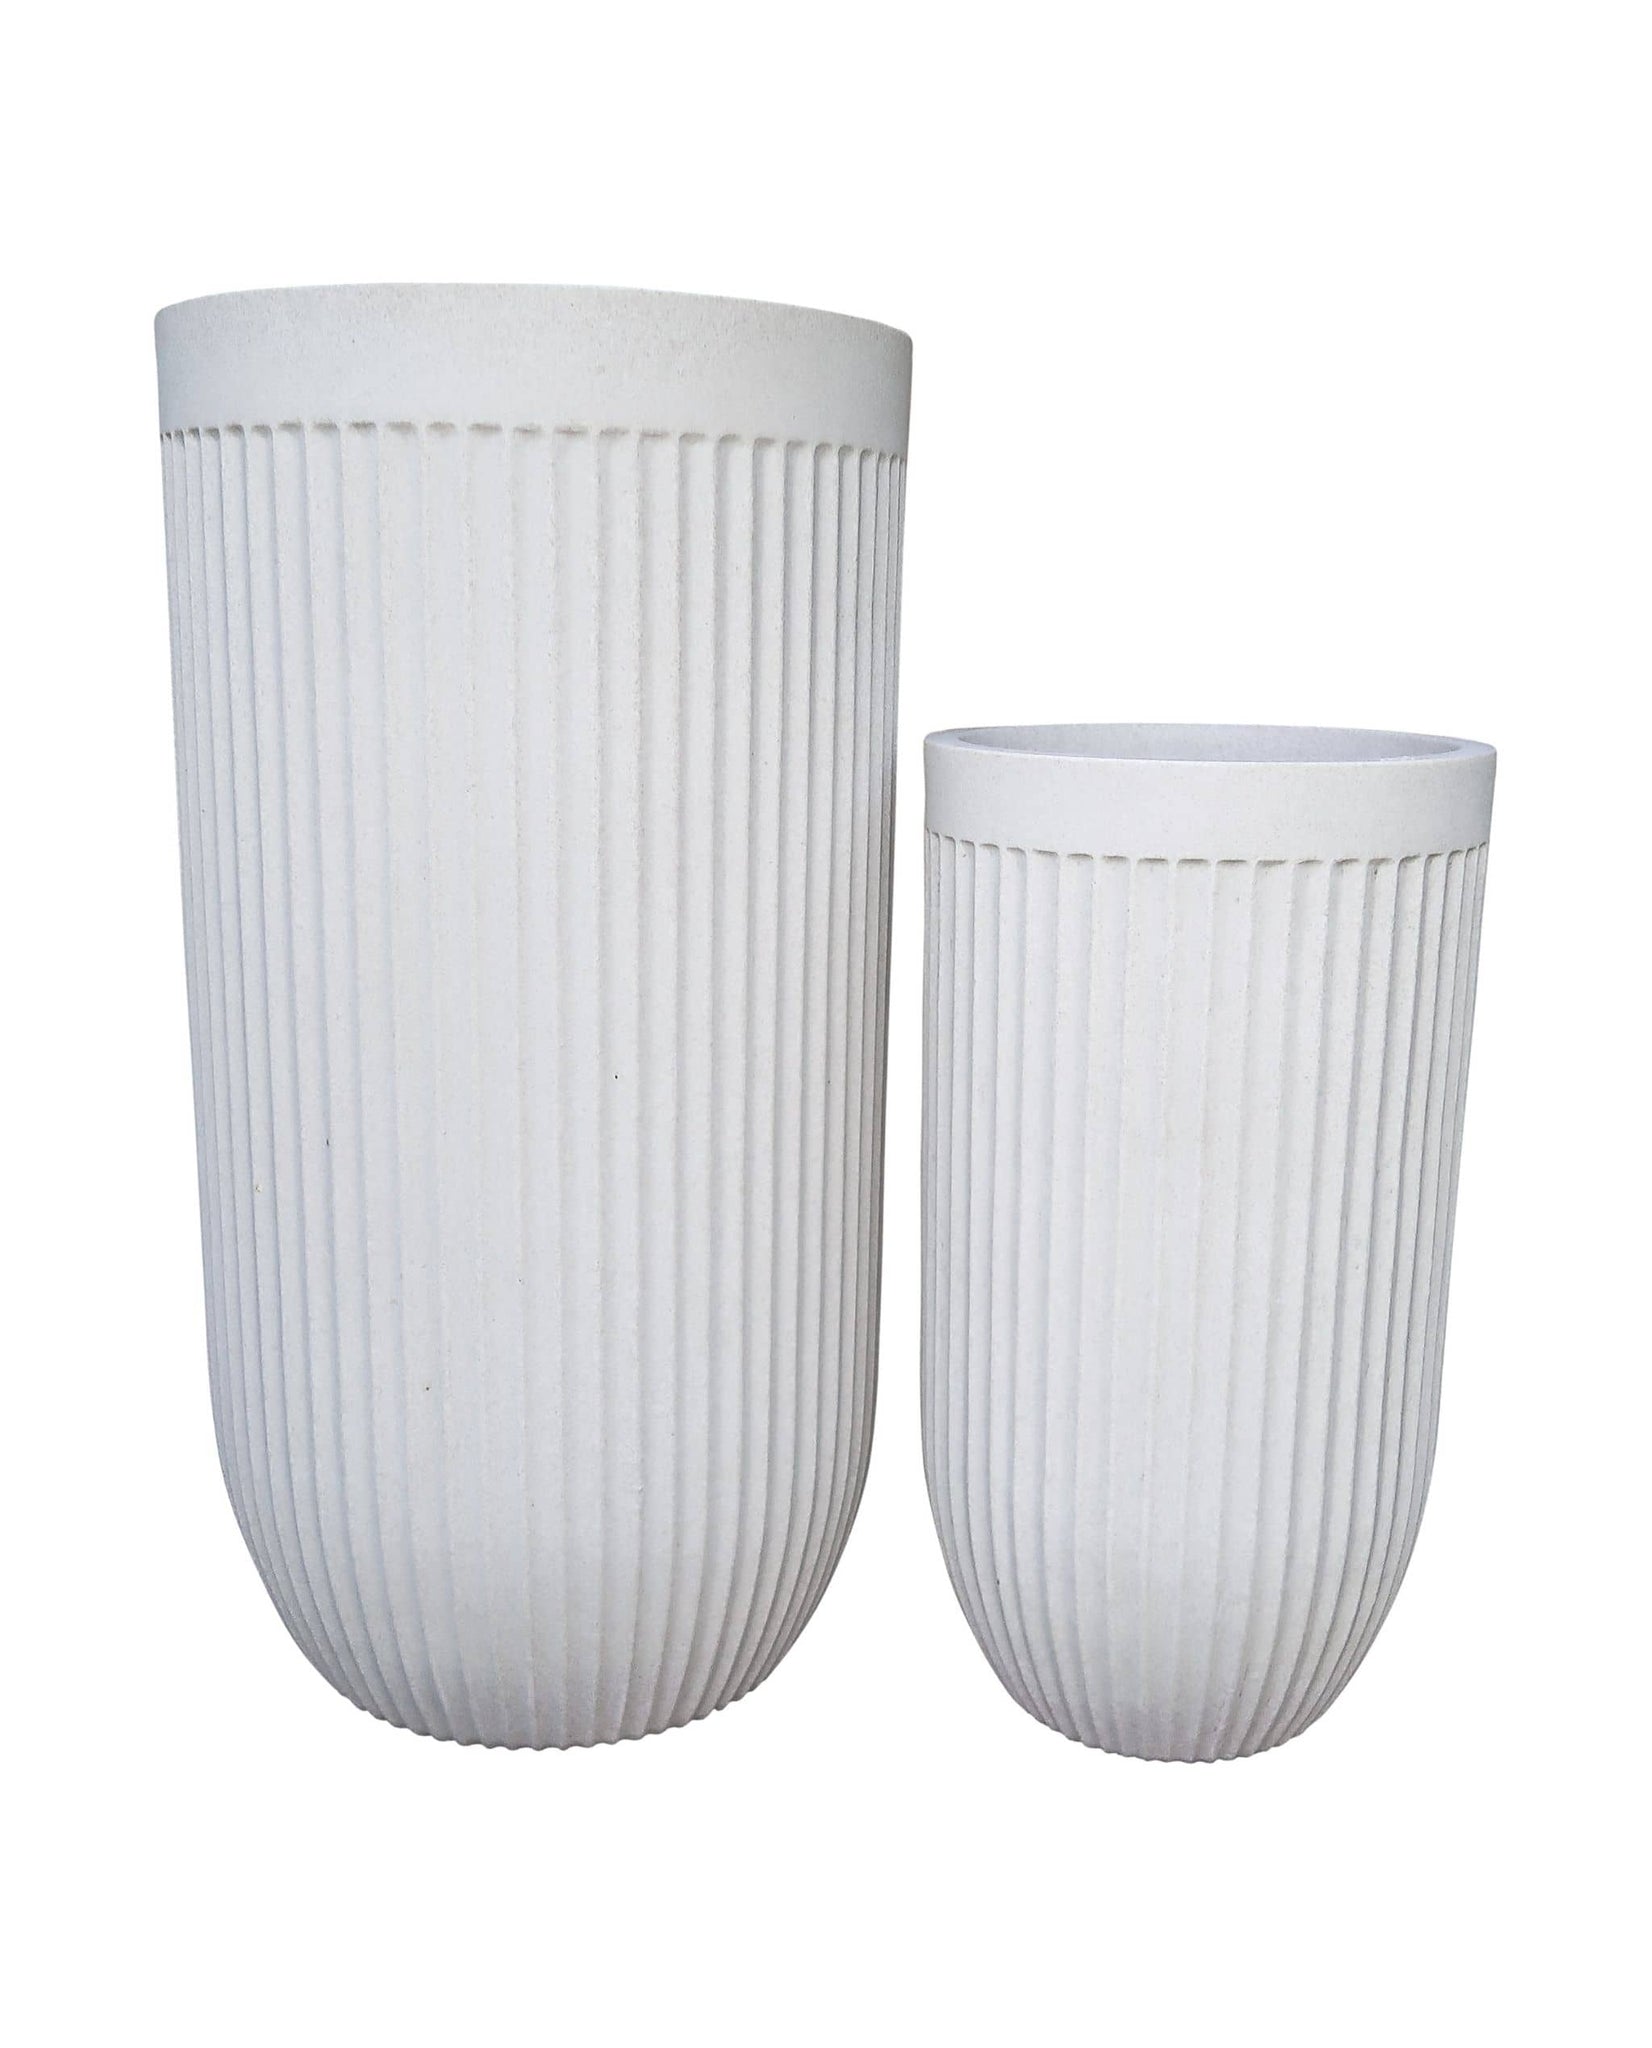 Tall and sleek. Modern and sophisticated. Plant pots that add style. Colour Off White